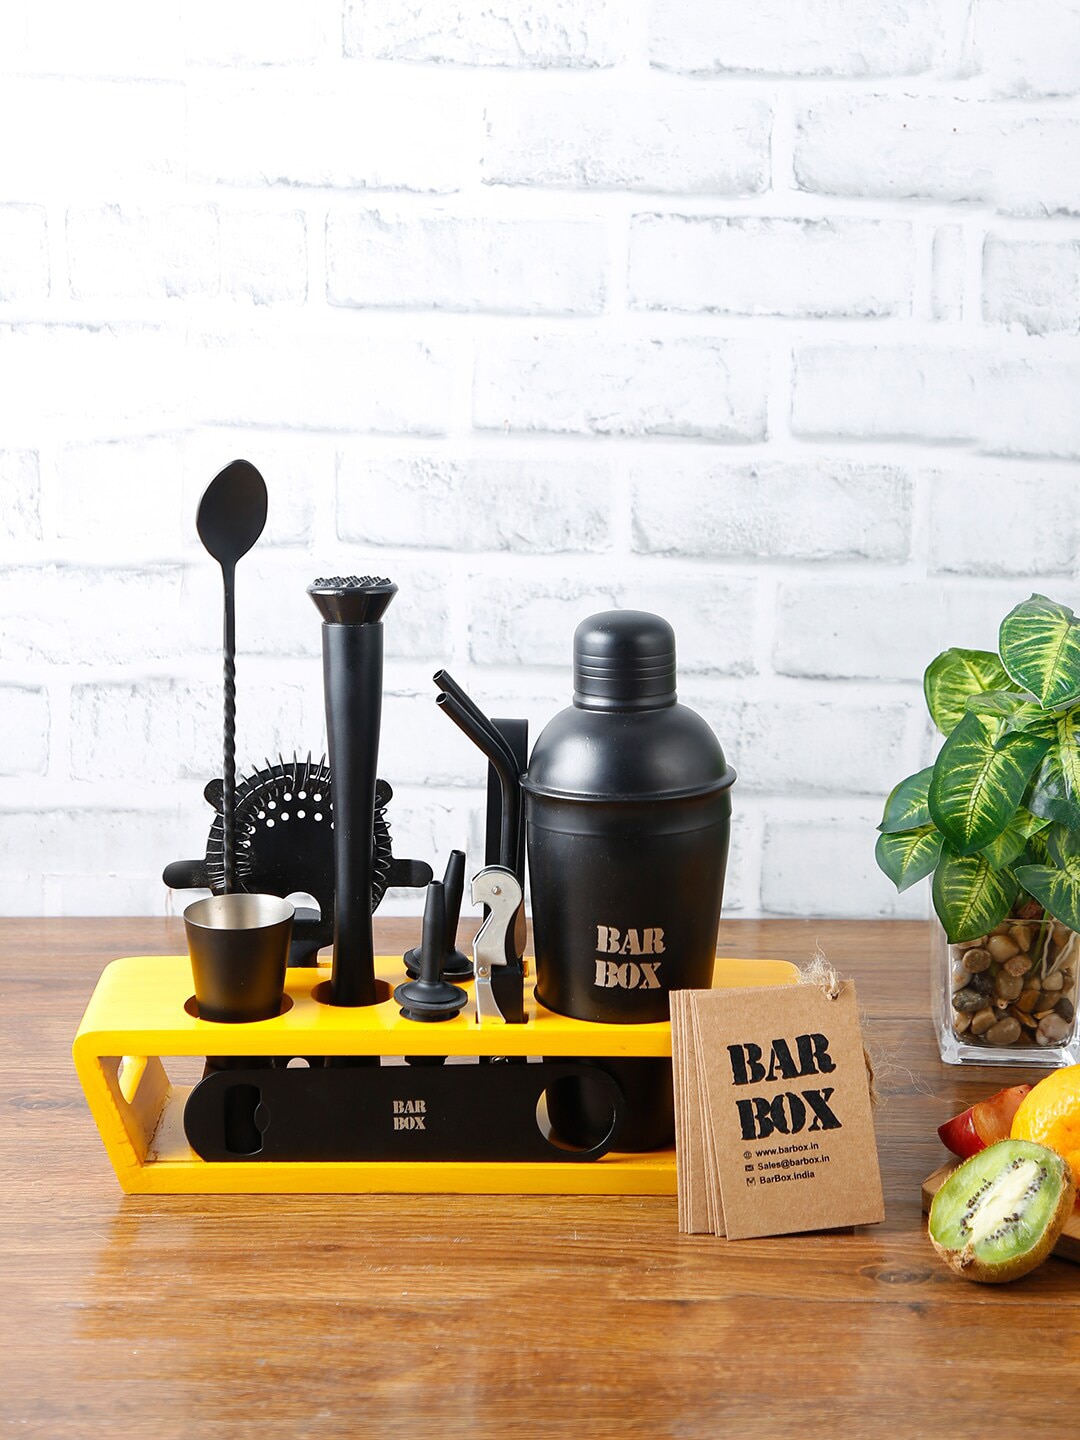 BAR BOX Black & Yellow Solid Stainless Steel Bar Tool Set With Wooden Stand Price in India